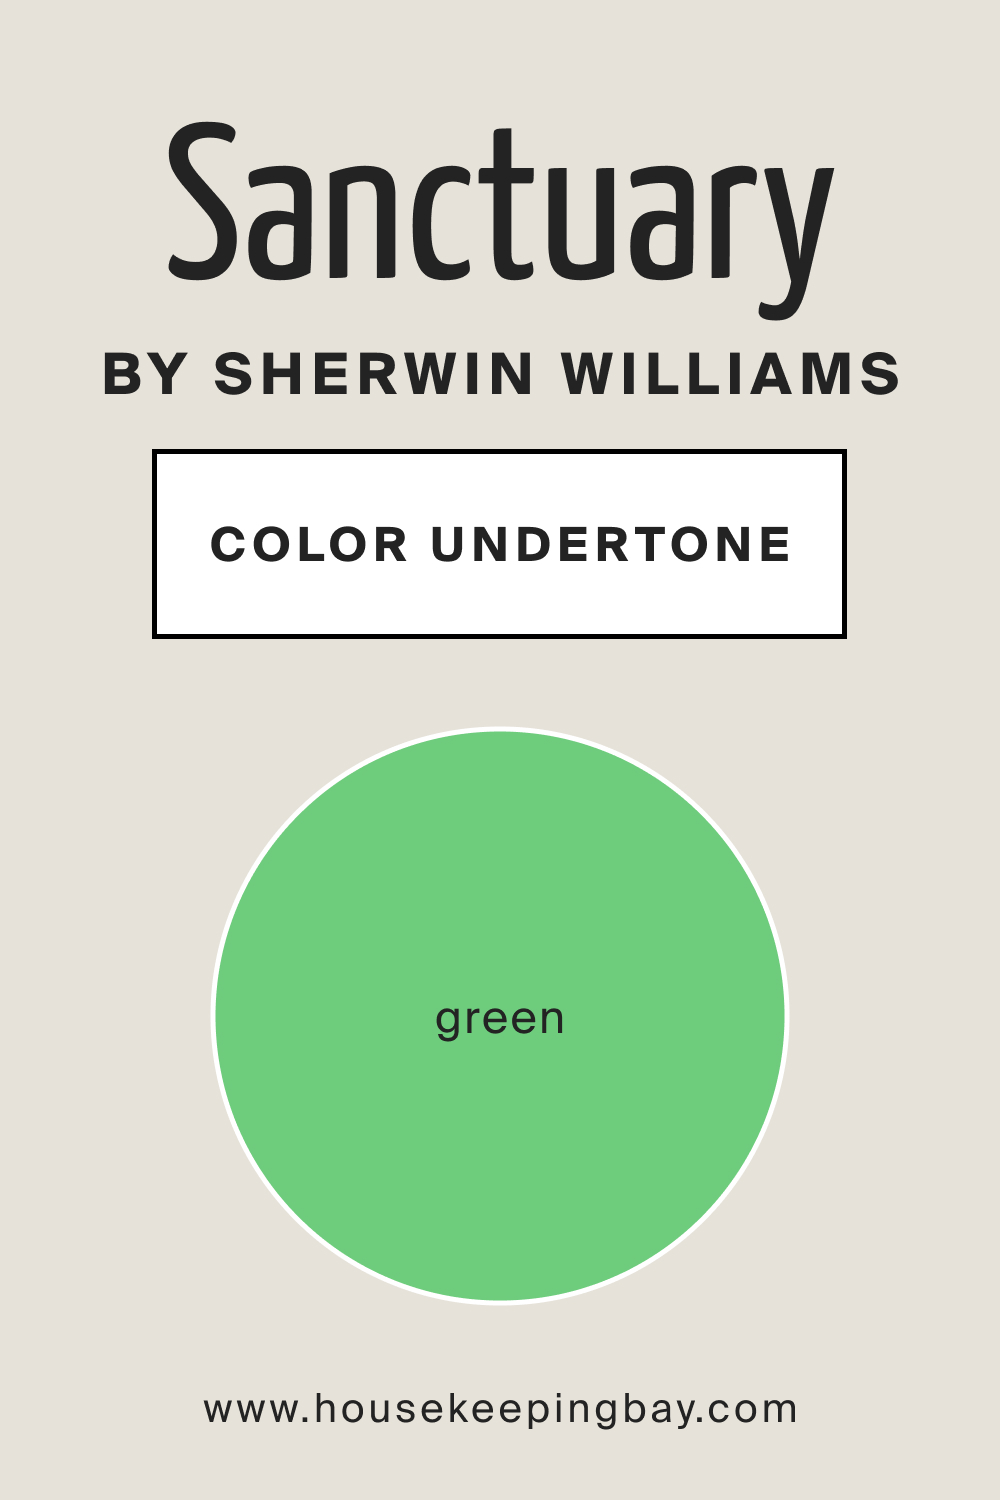 SW 9583 Sanctuary by Sherwin Williams Color Undertone